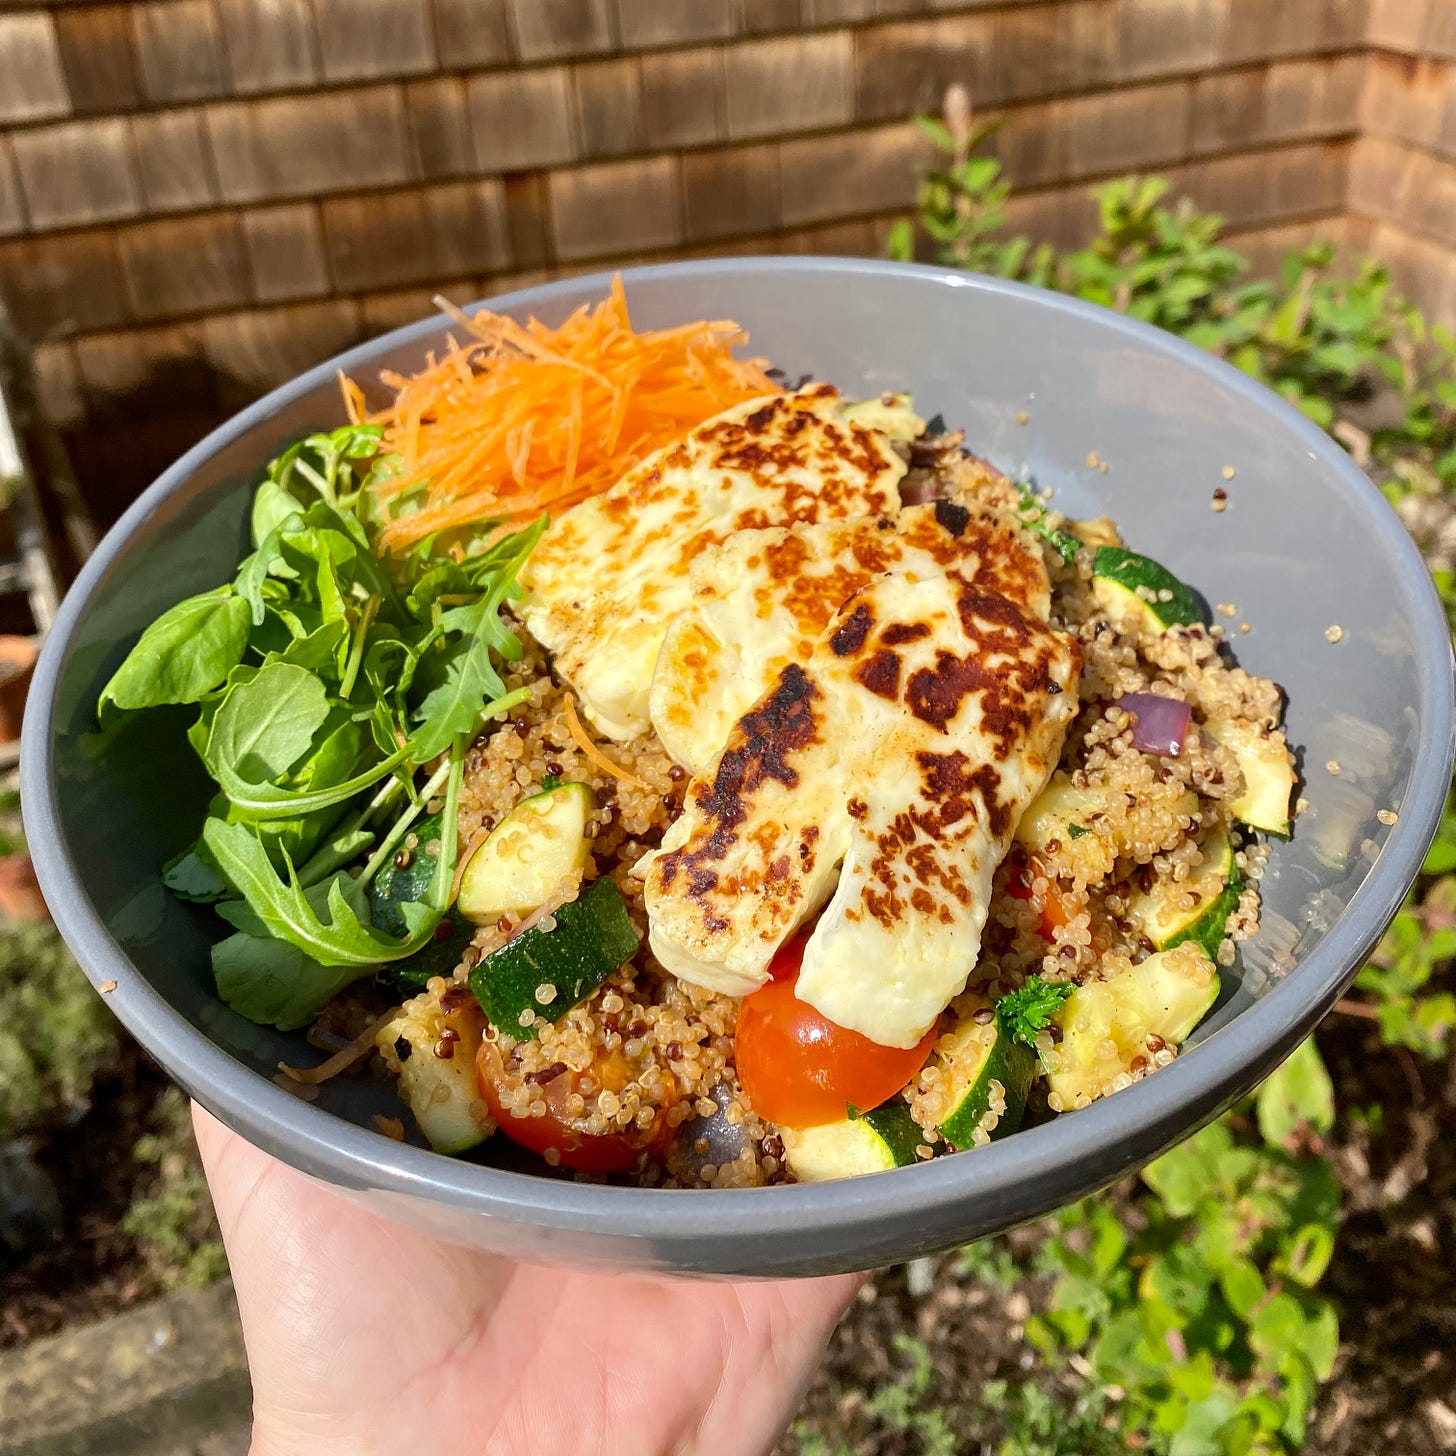 Bowl of quinoa with courgette, halloumi and salad